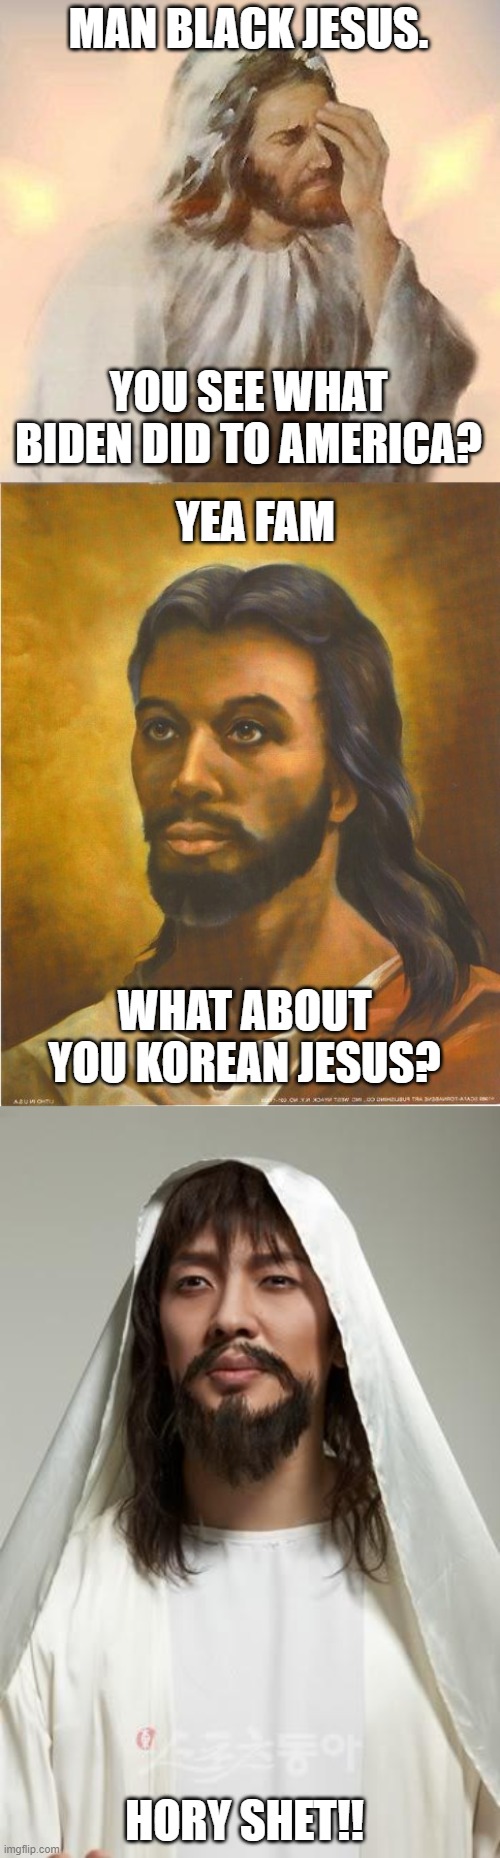 MAN BLACK JESUS. YOU SEE WHAT BIDEN DID TO AMERICA? YEA FAM WHAT ABOUT YOU KOREAN JESUS? HORY SHET!! | image tagged in black jesus,korean jesus | made w/ Imgflip meme maker